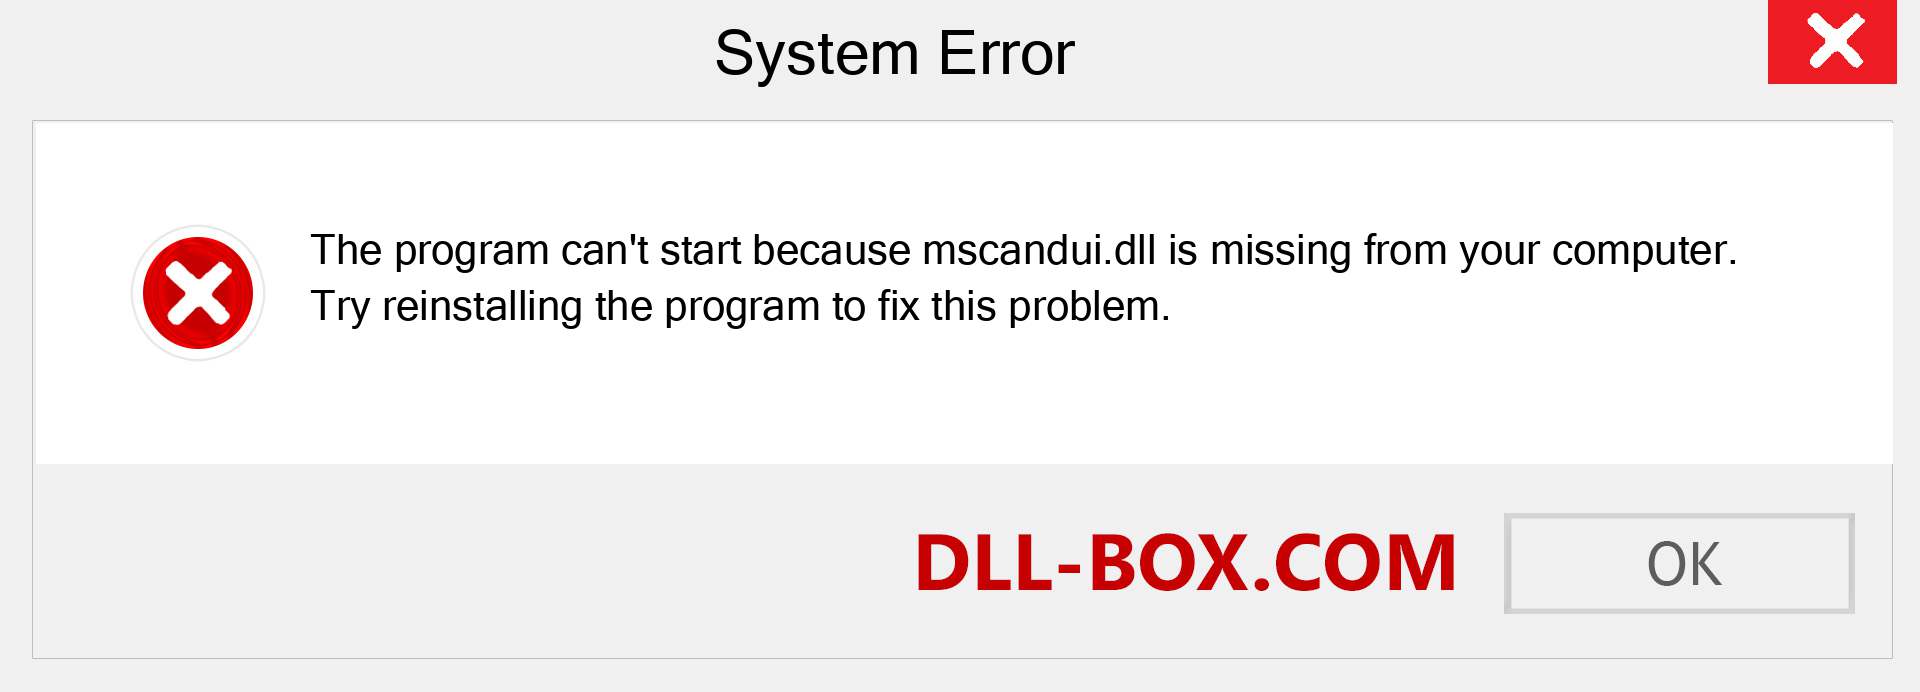  mscandui.dll file is missing?. Download for Windows 7, 8, 10 - Fix  mscandui dll Missing Error on Windows, photos, images